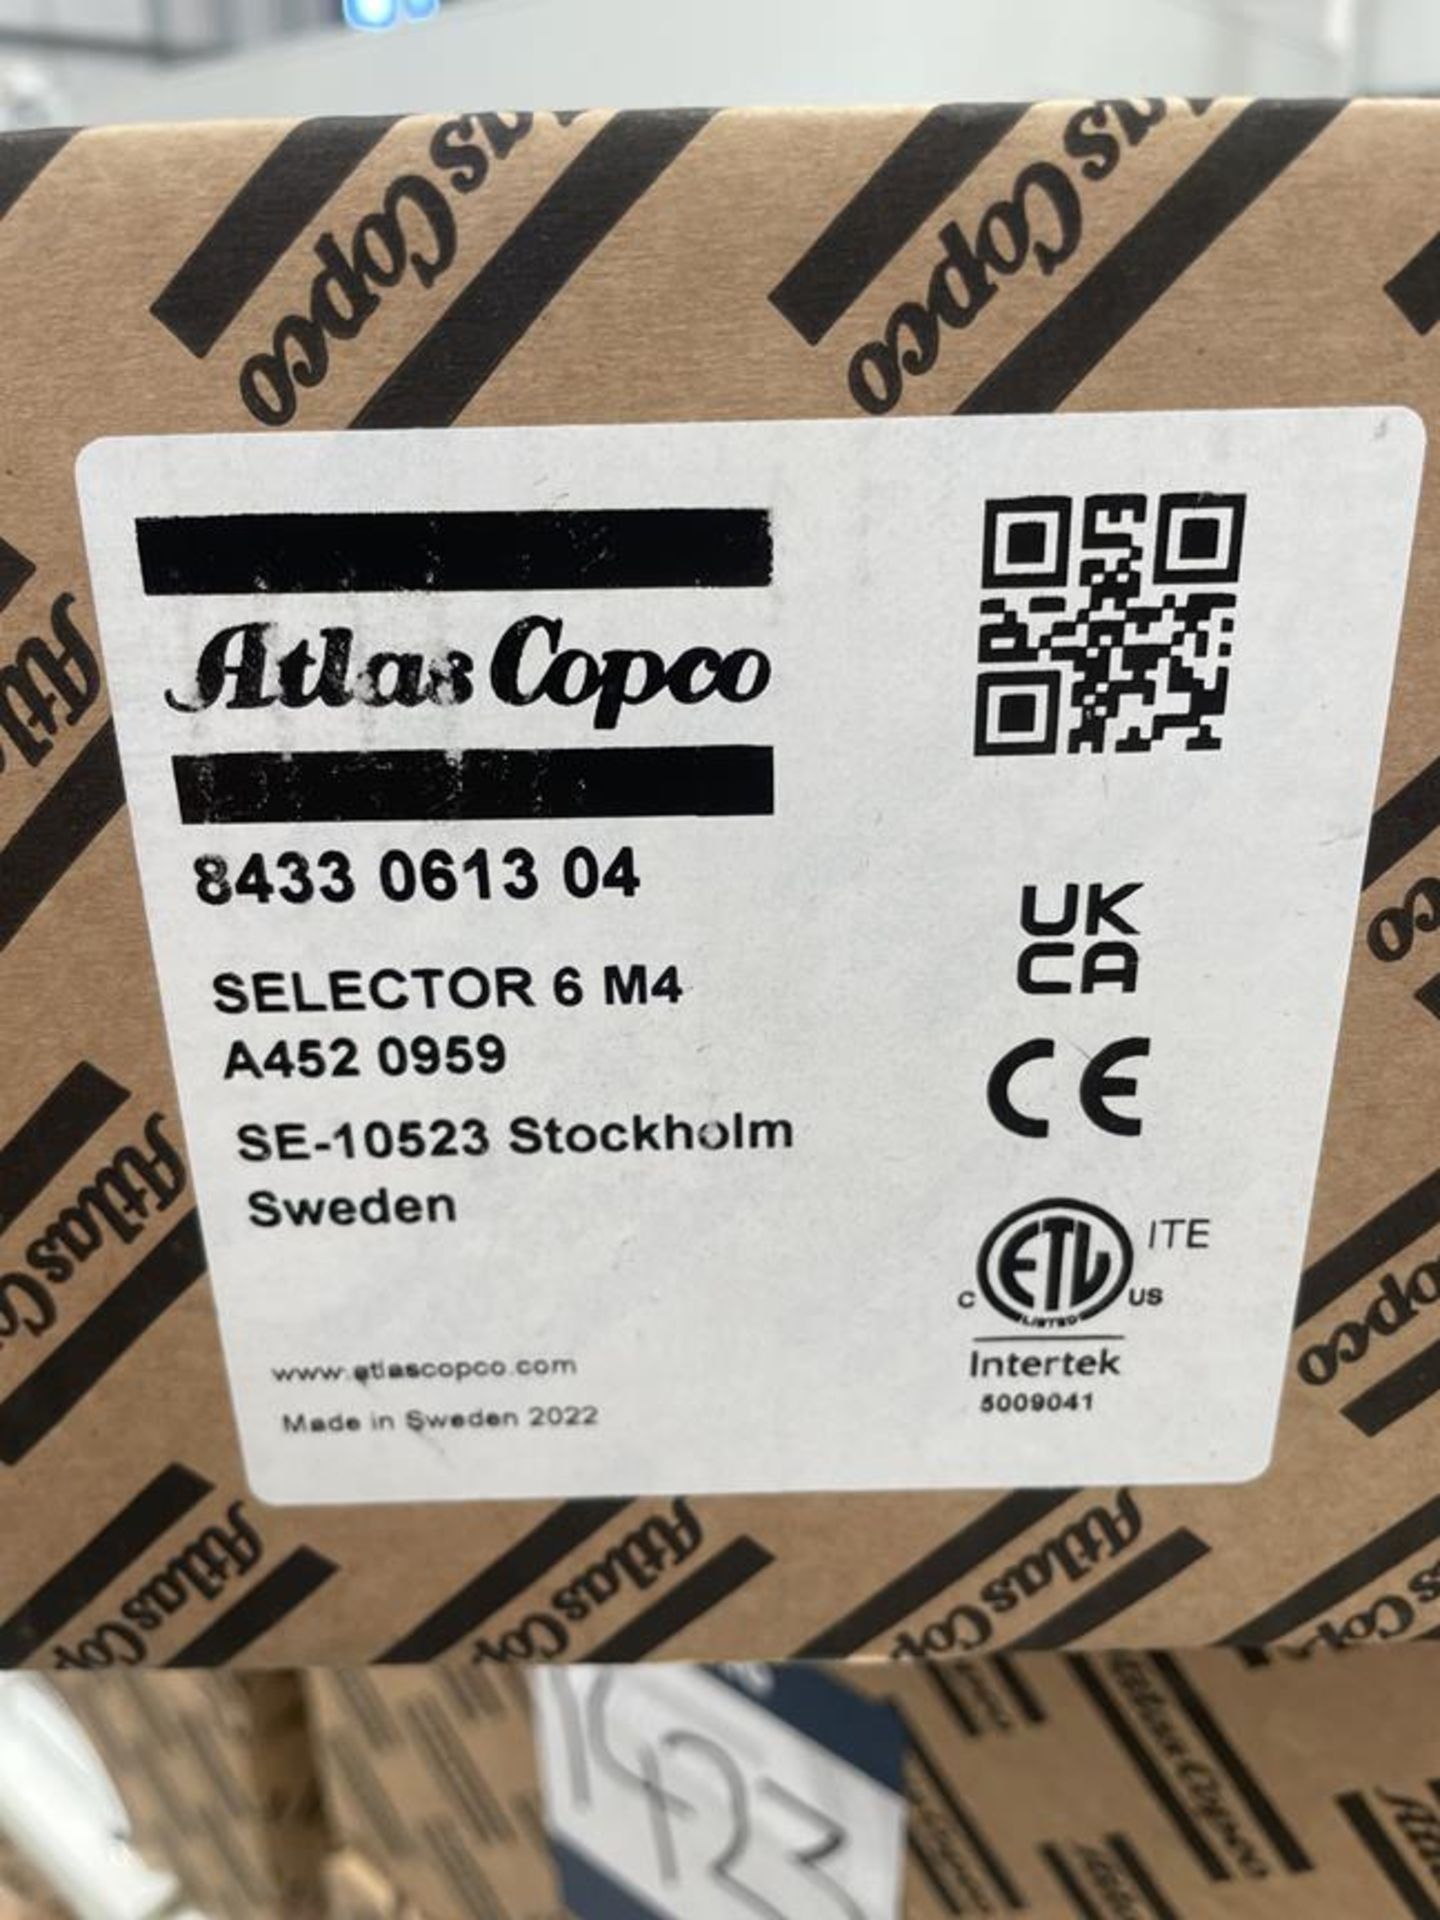 4x (no.) Atlas Copco, Selector 6 M4 LED socket selection indicator (boxed and unused) - Image 2 of 2